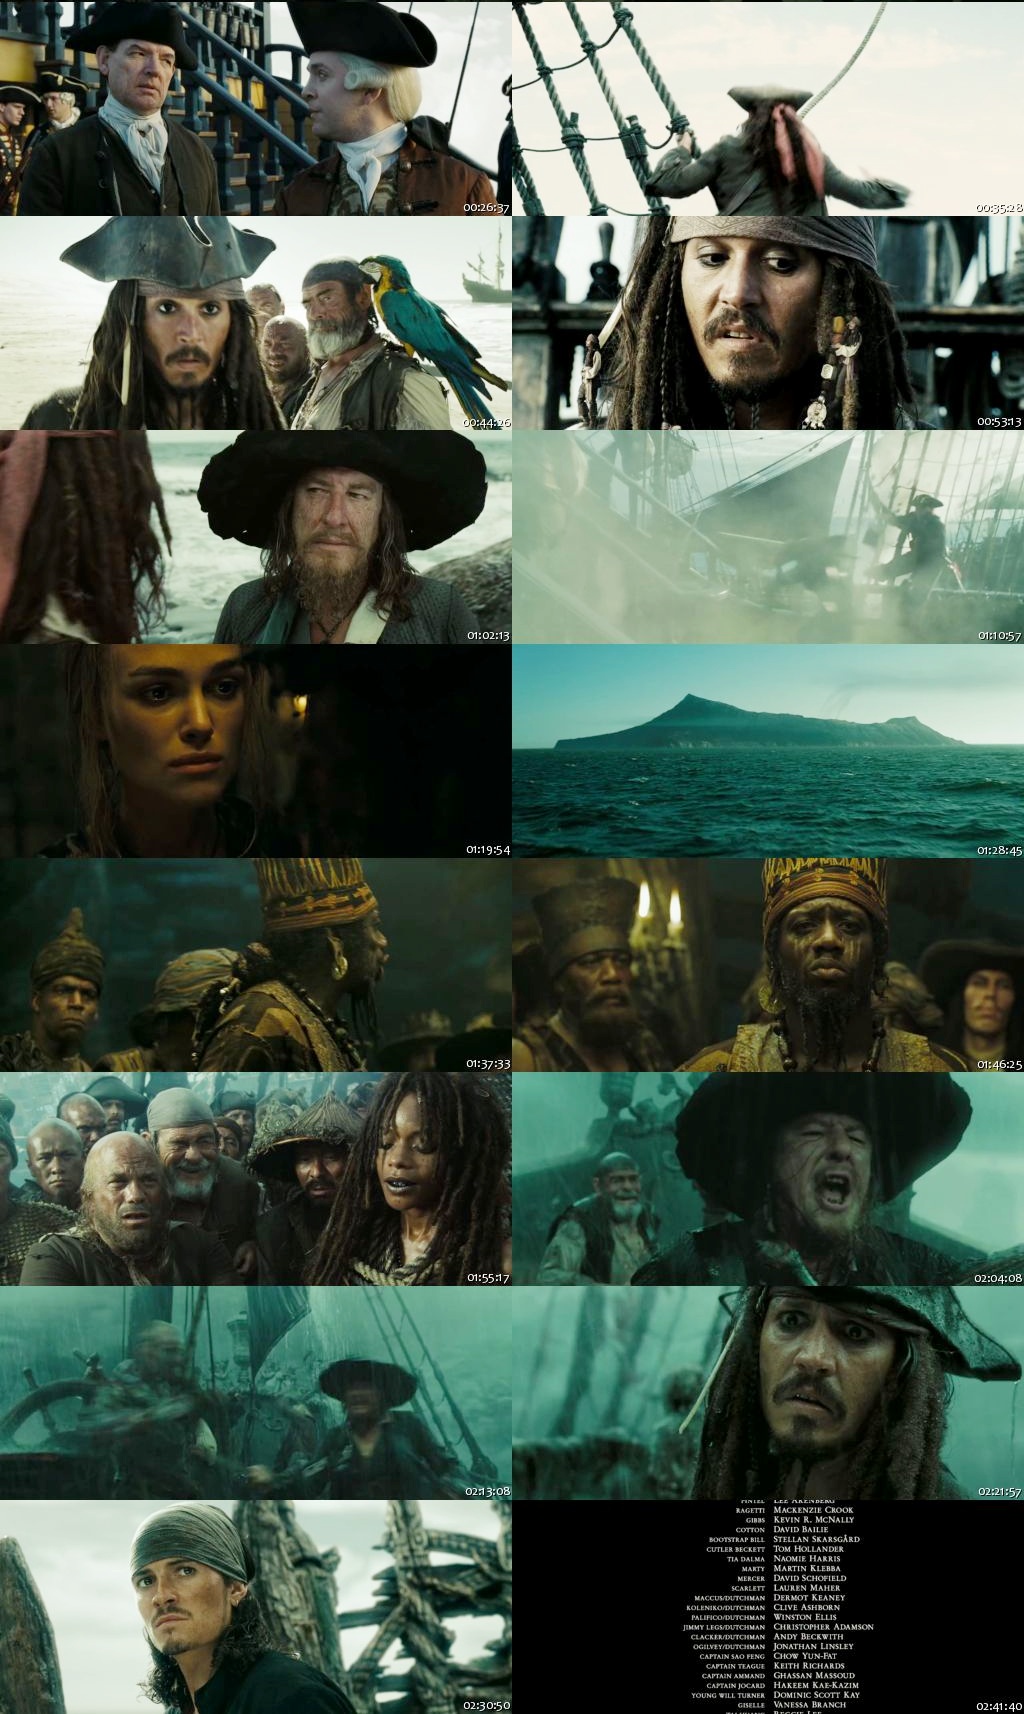 Pirates of the Caribbean: At World’s End - GoTorrent BD